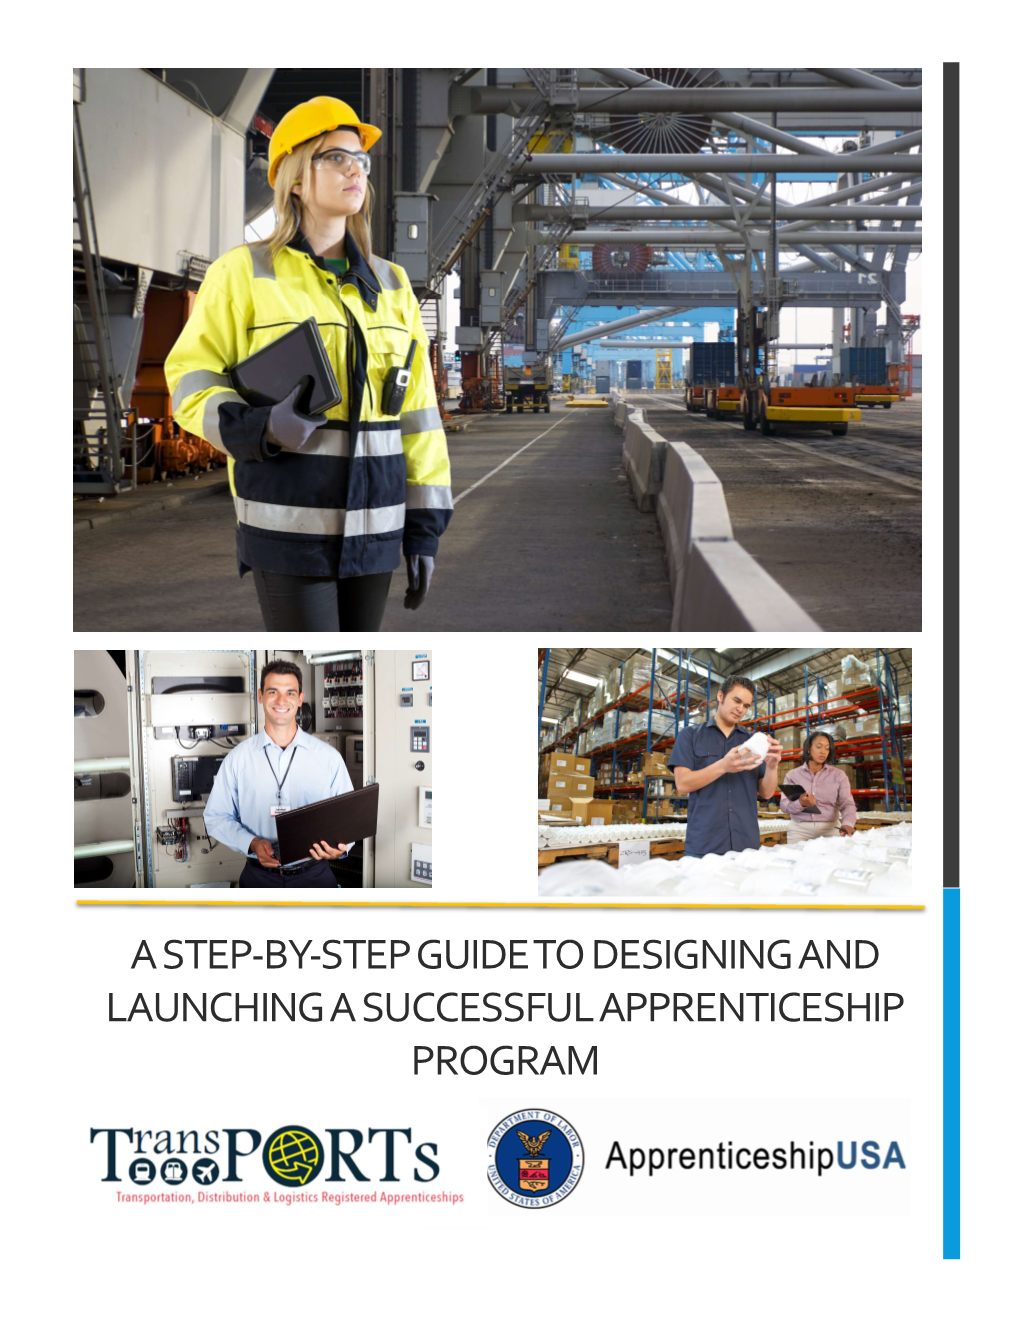 A Step-By-Step Guide to Designing and Launching a Successful Apprenticeship Program